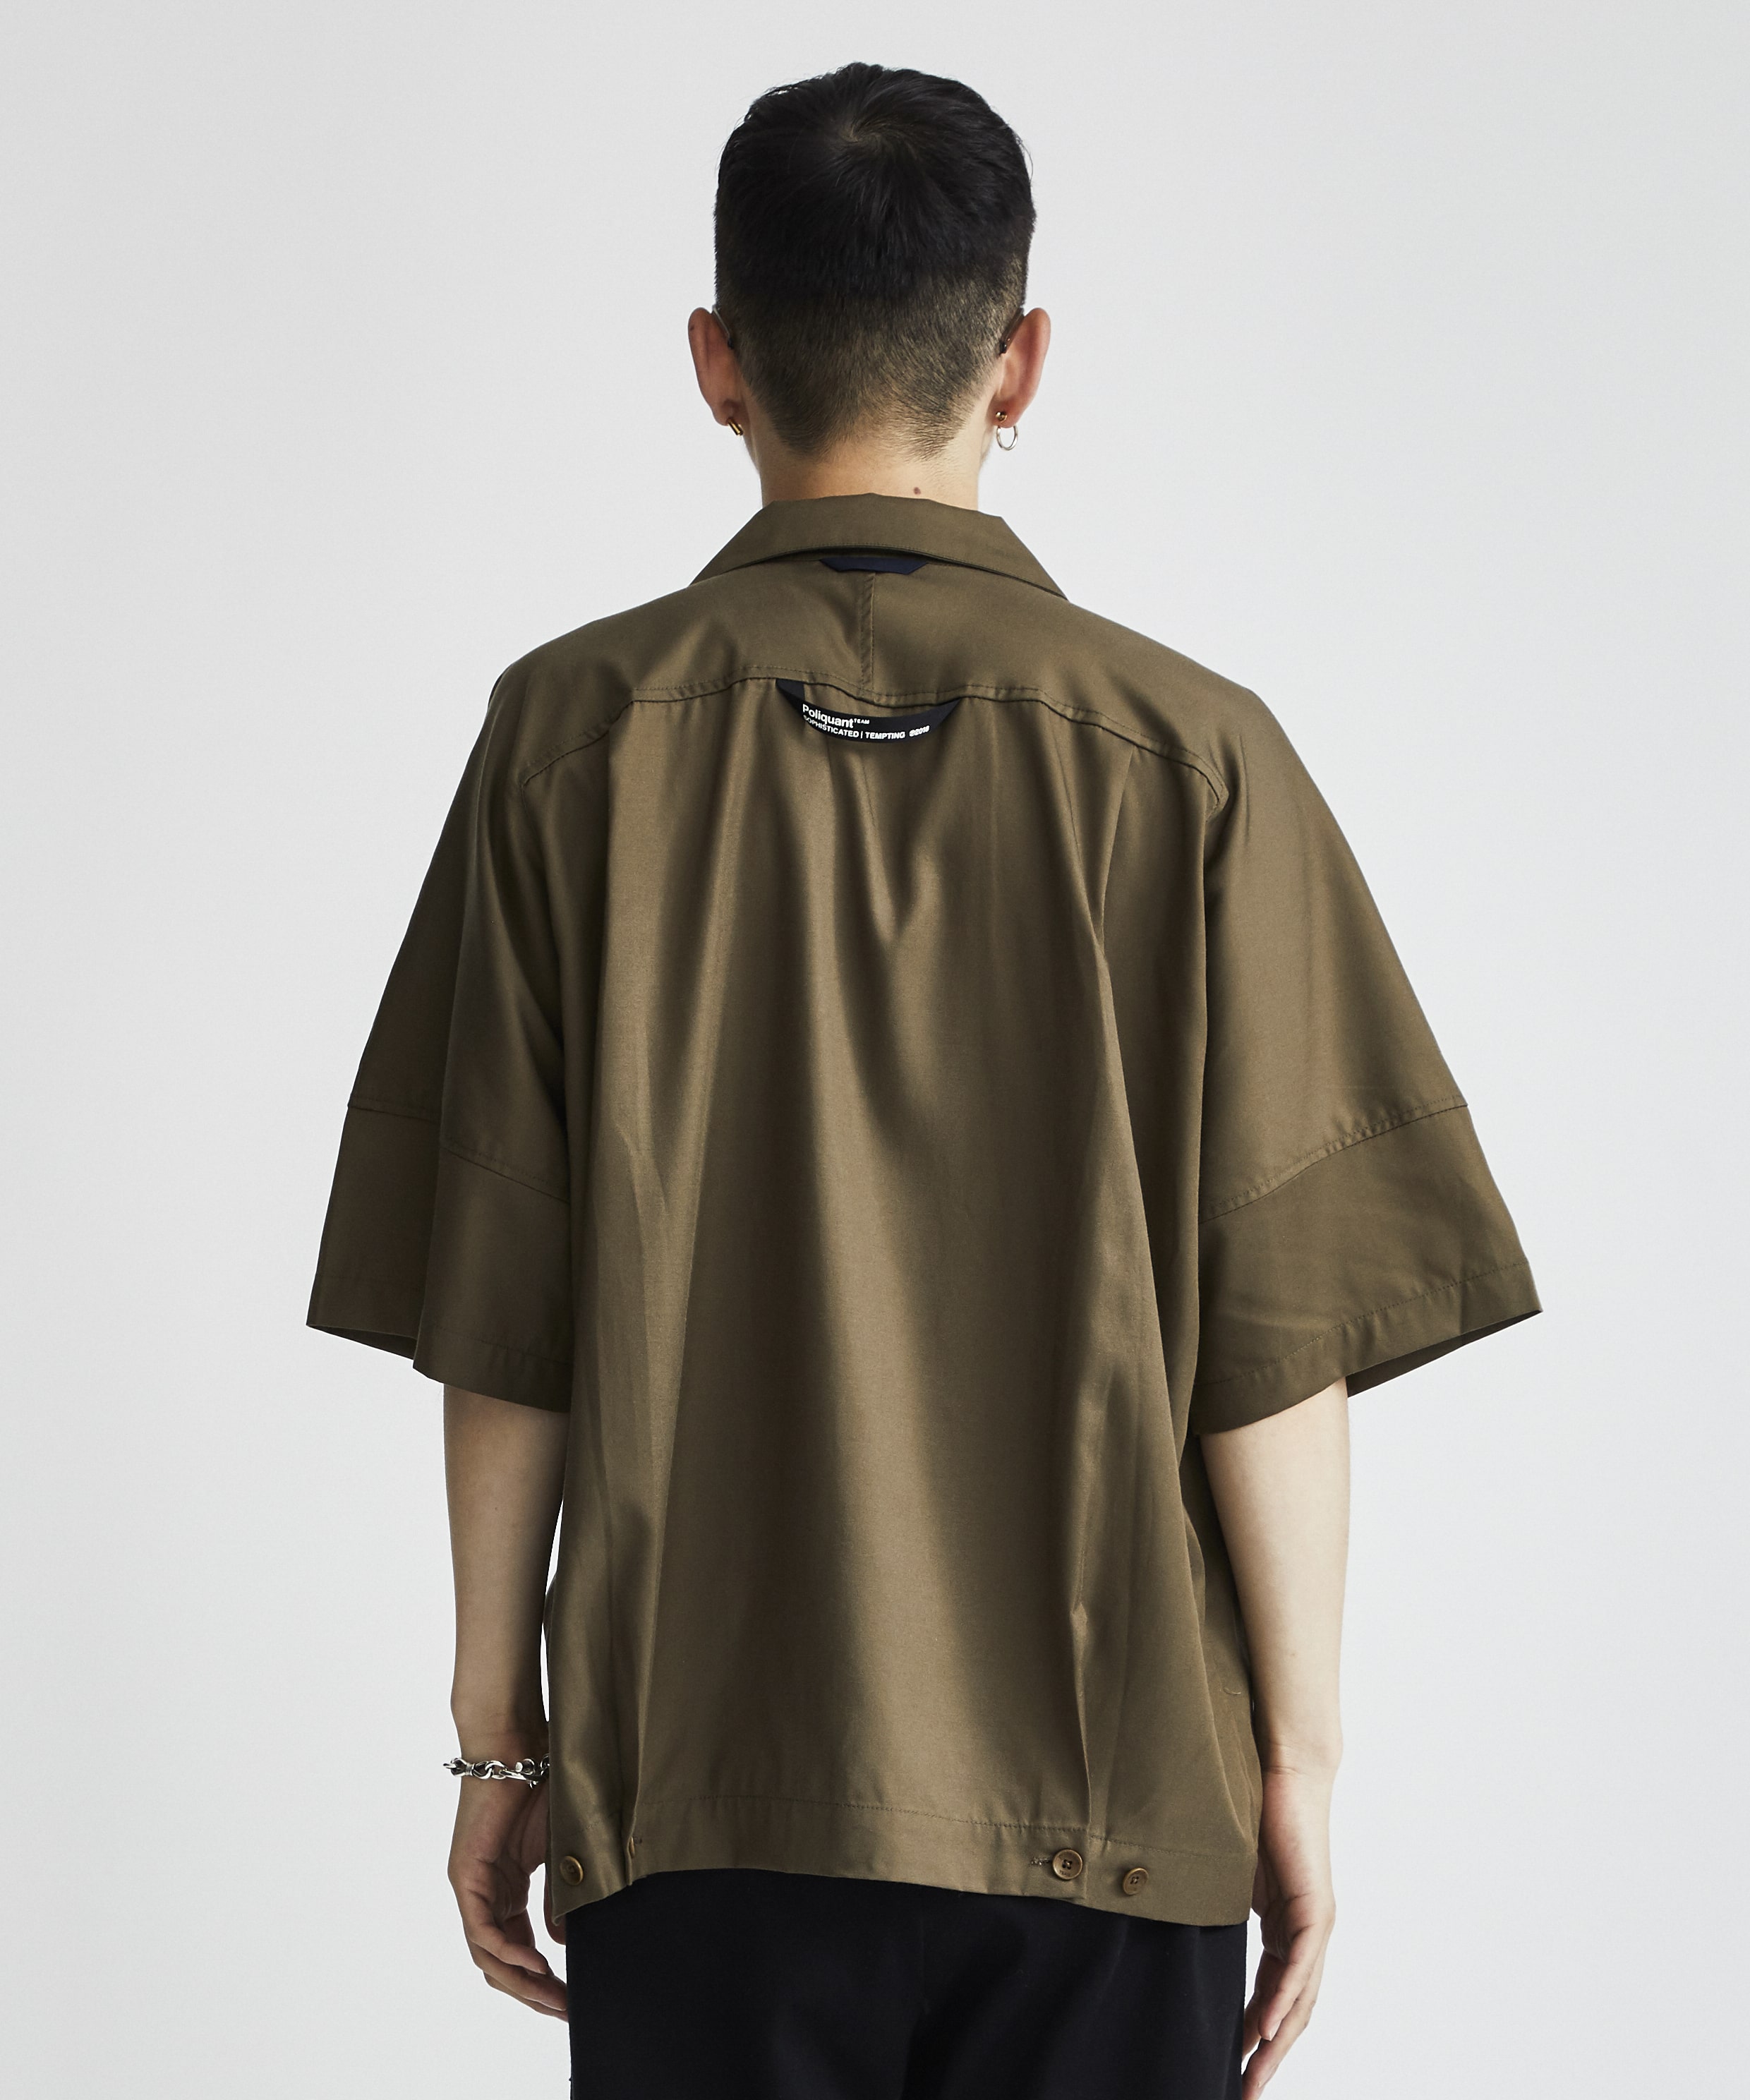 THE DEFORMED LAPELLED COLLAR S/S SHIRTS POLIQUANT